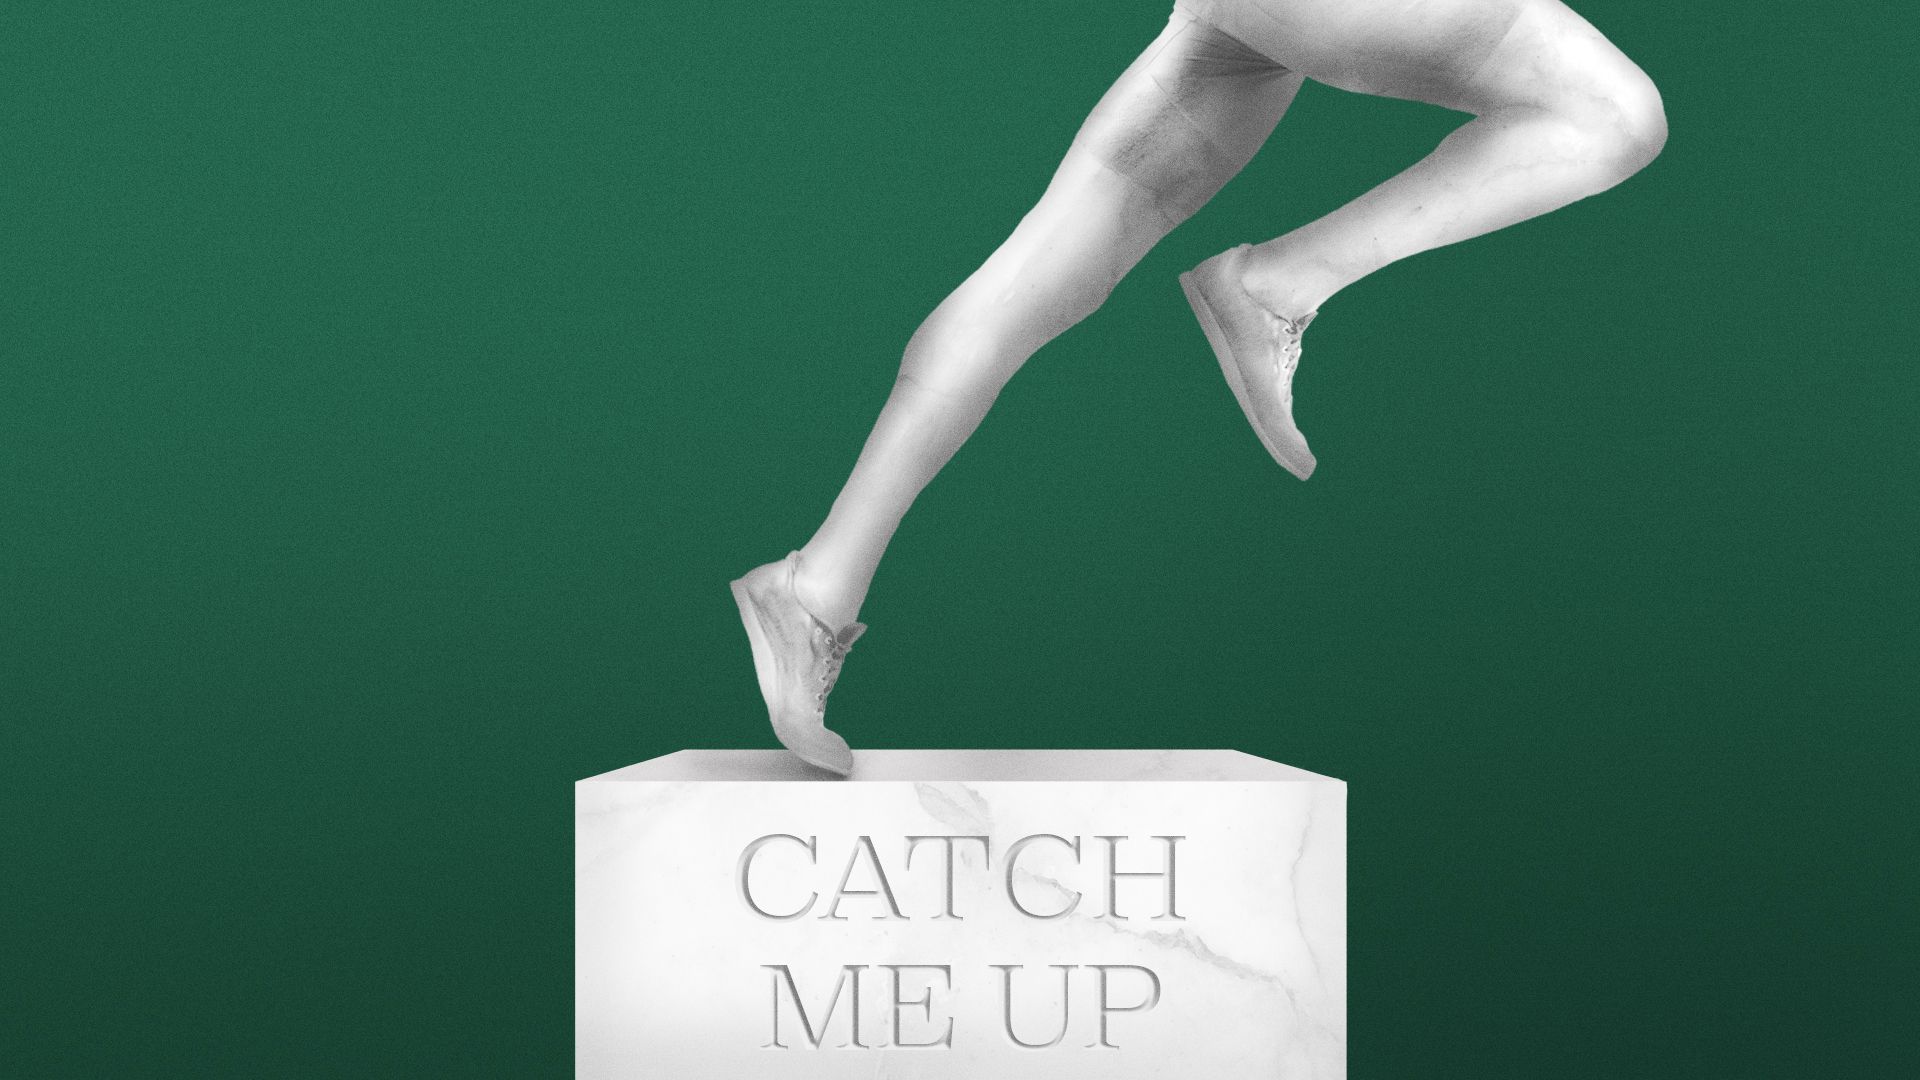 Illustration of a statue of a running person with the words "Catch Me Up" engraved on the pedestal.